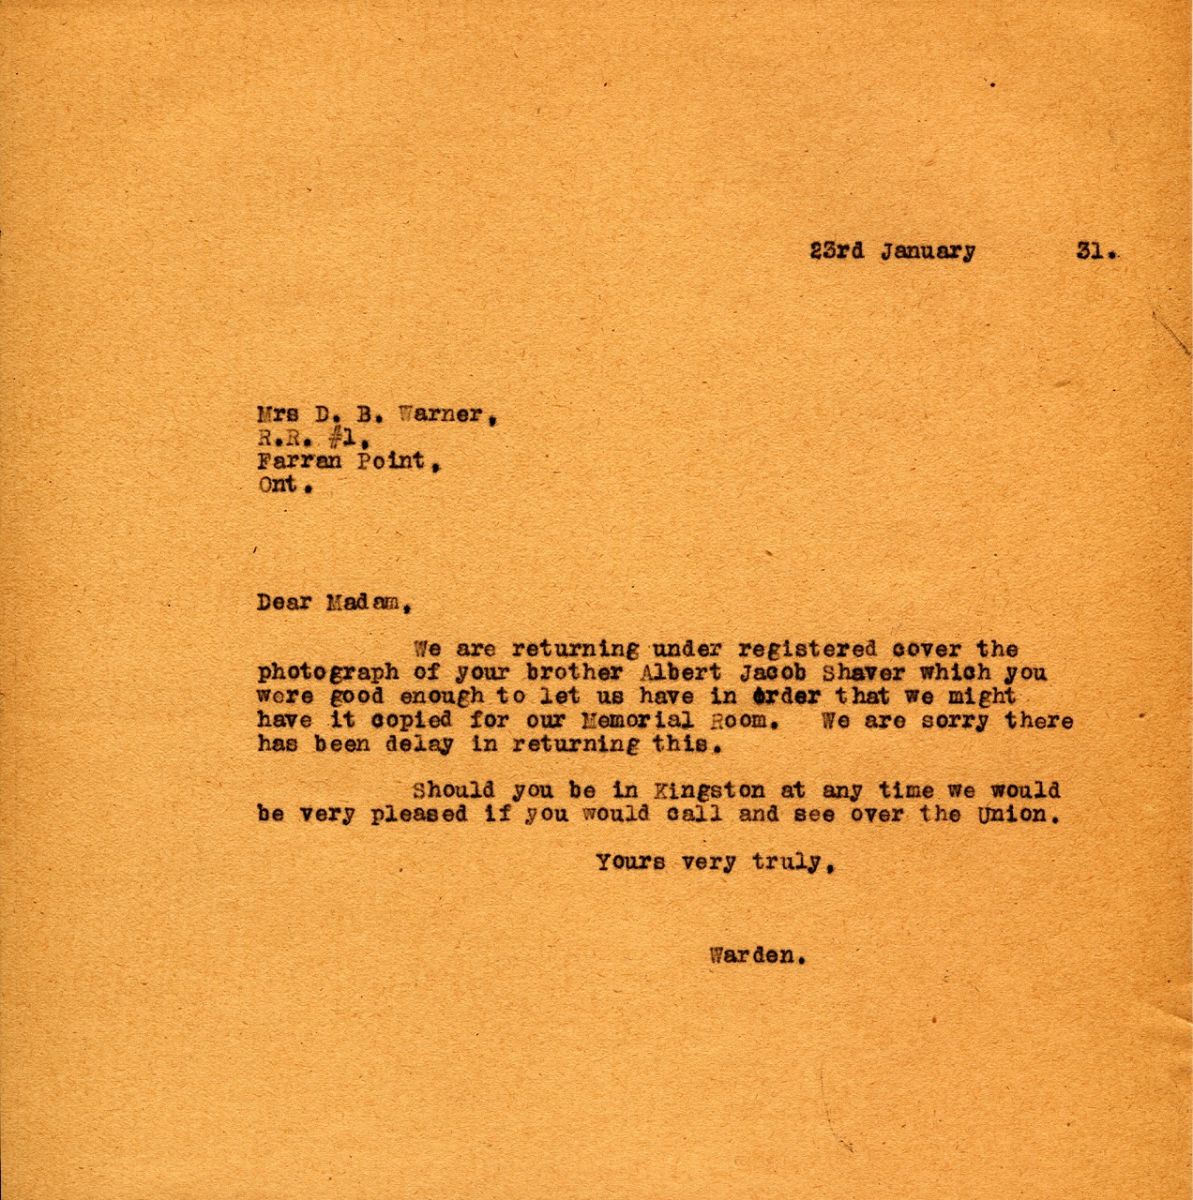 Letter from the Warden to Mrs. D.B. Warner, 23rd January 1931